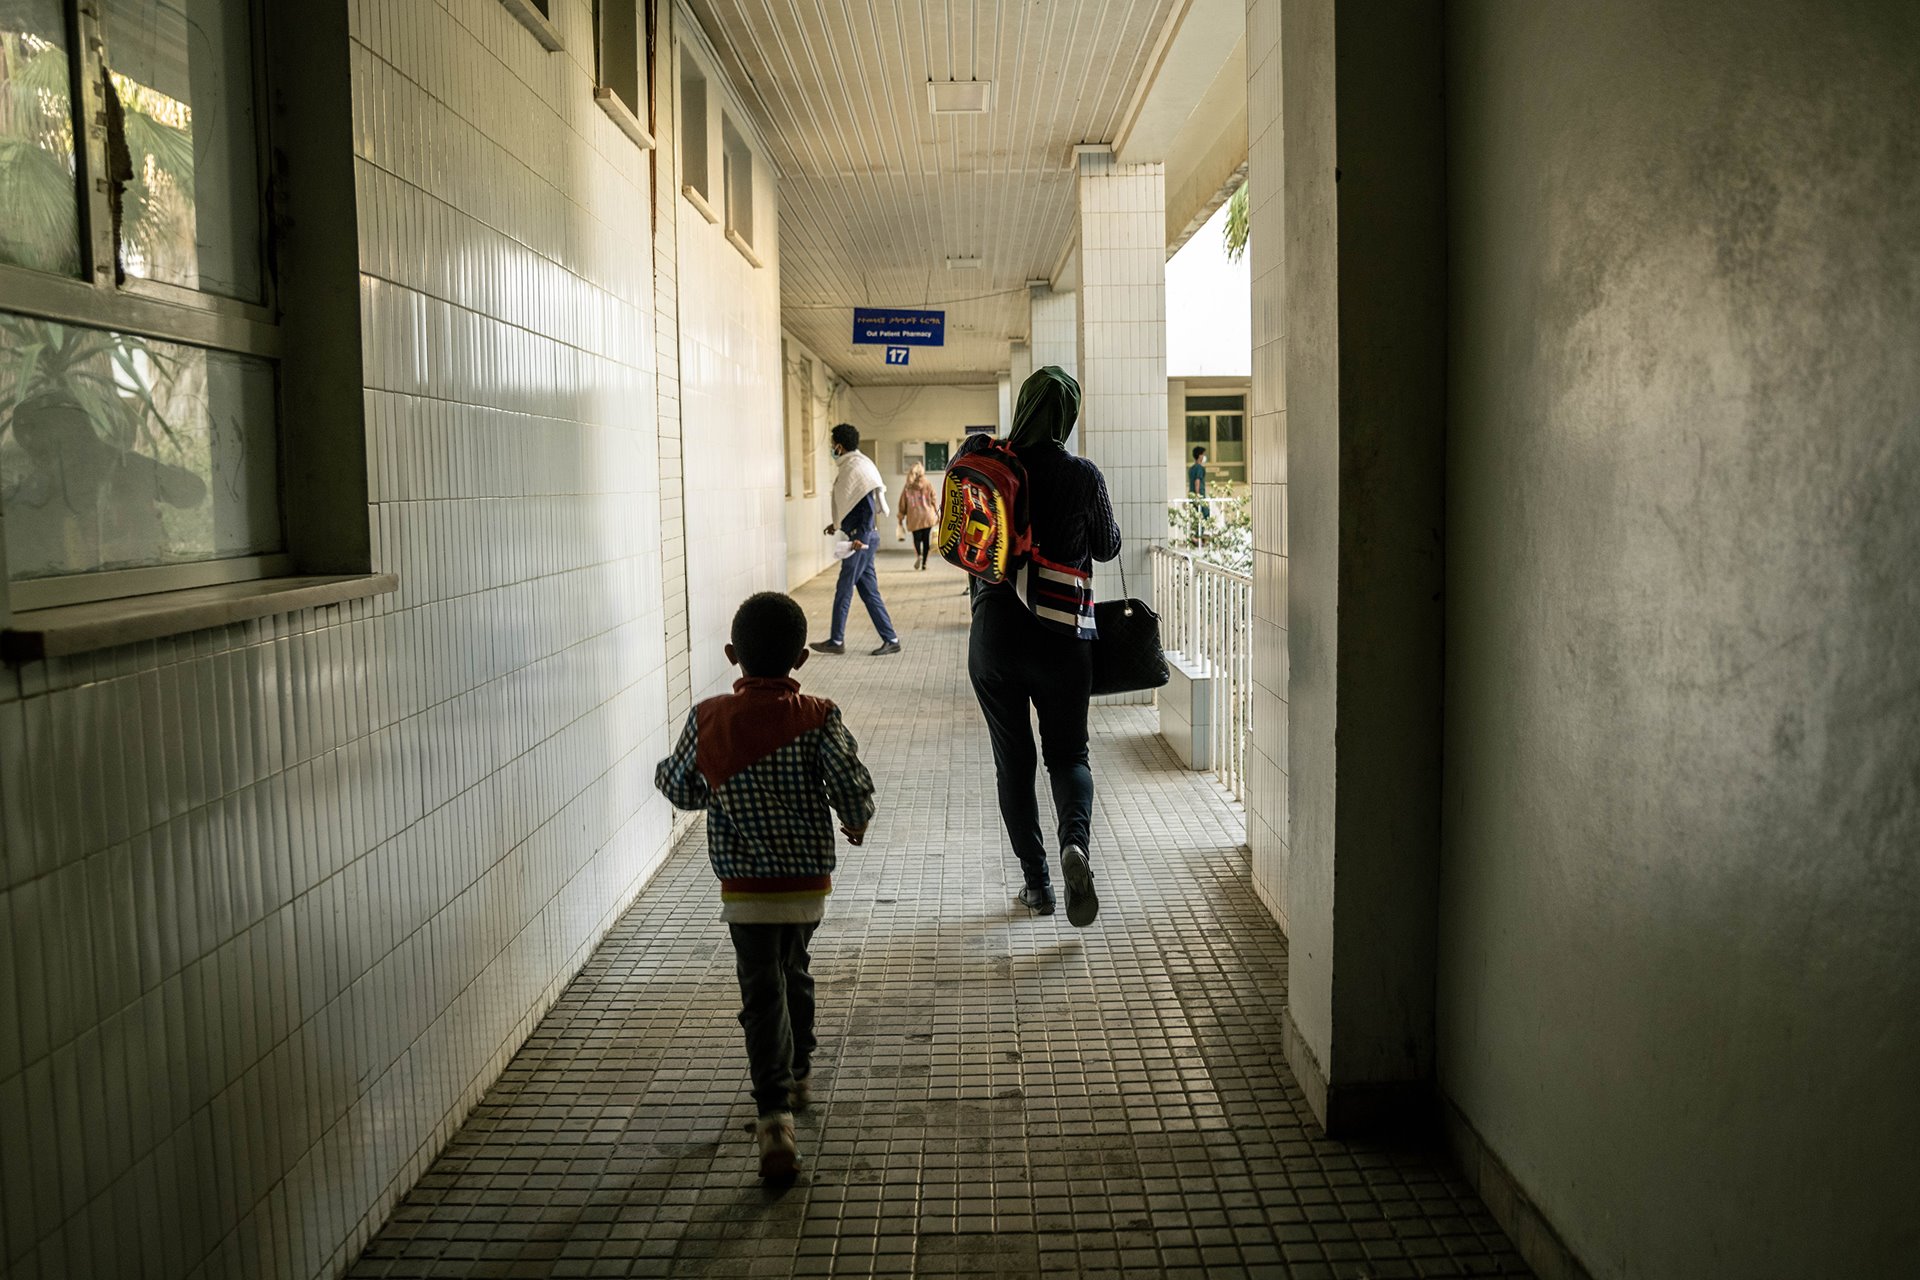 Shila (32) and her son walk down a corridor of Ayder Hospital for a medical appointment in Mekele, Ethiopia. Ayder Hospital is the largest hospital in Tigray. During the war it was cut off from supplies and struggled to serve a massive influx of trauma patients.